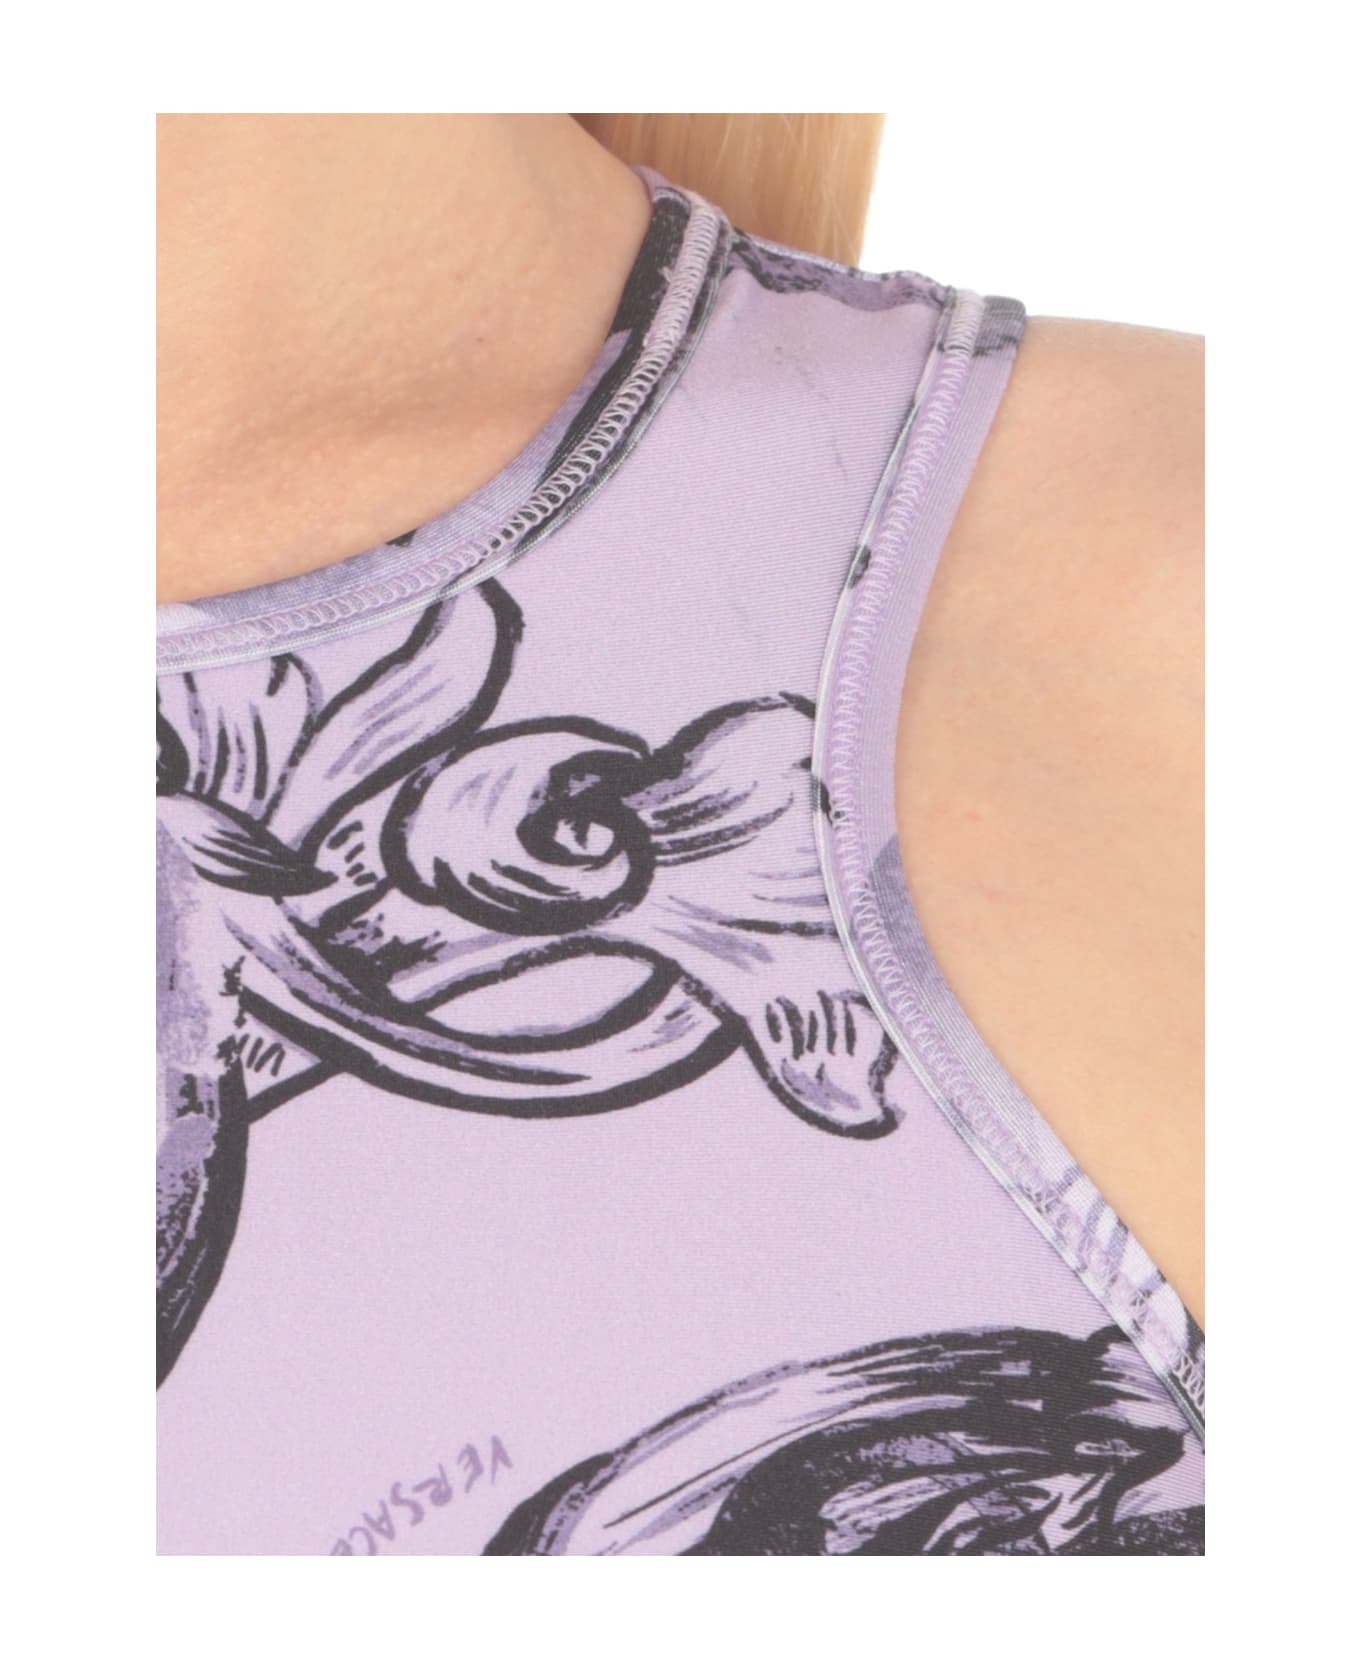 Versace Jeans Couture Watercolour Couture Top - Purple